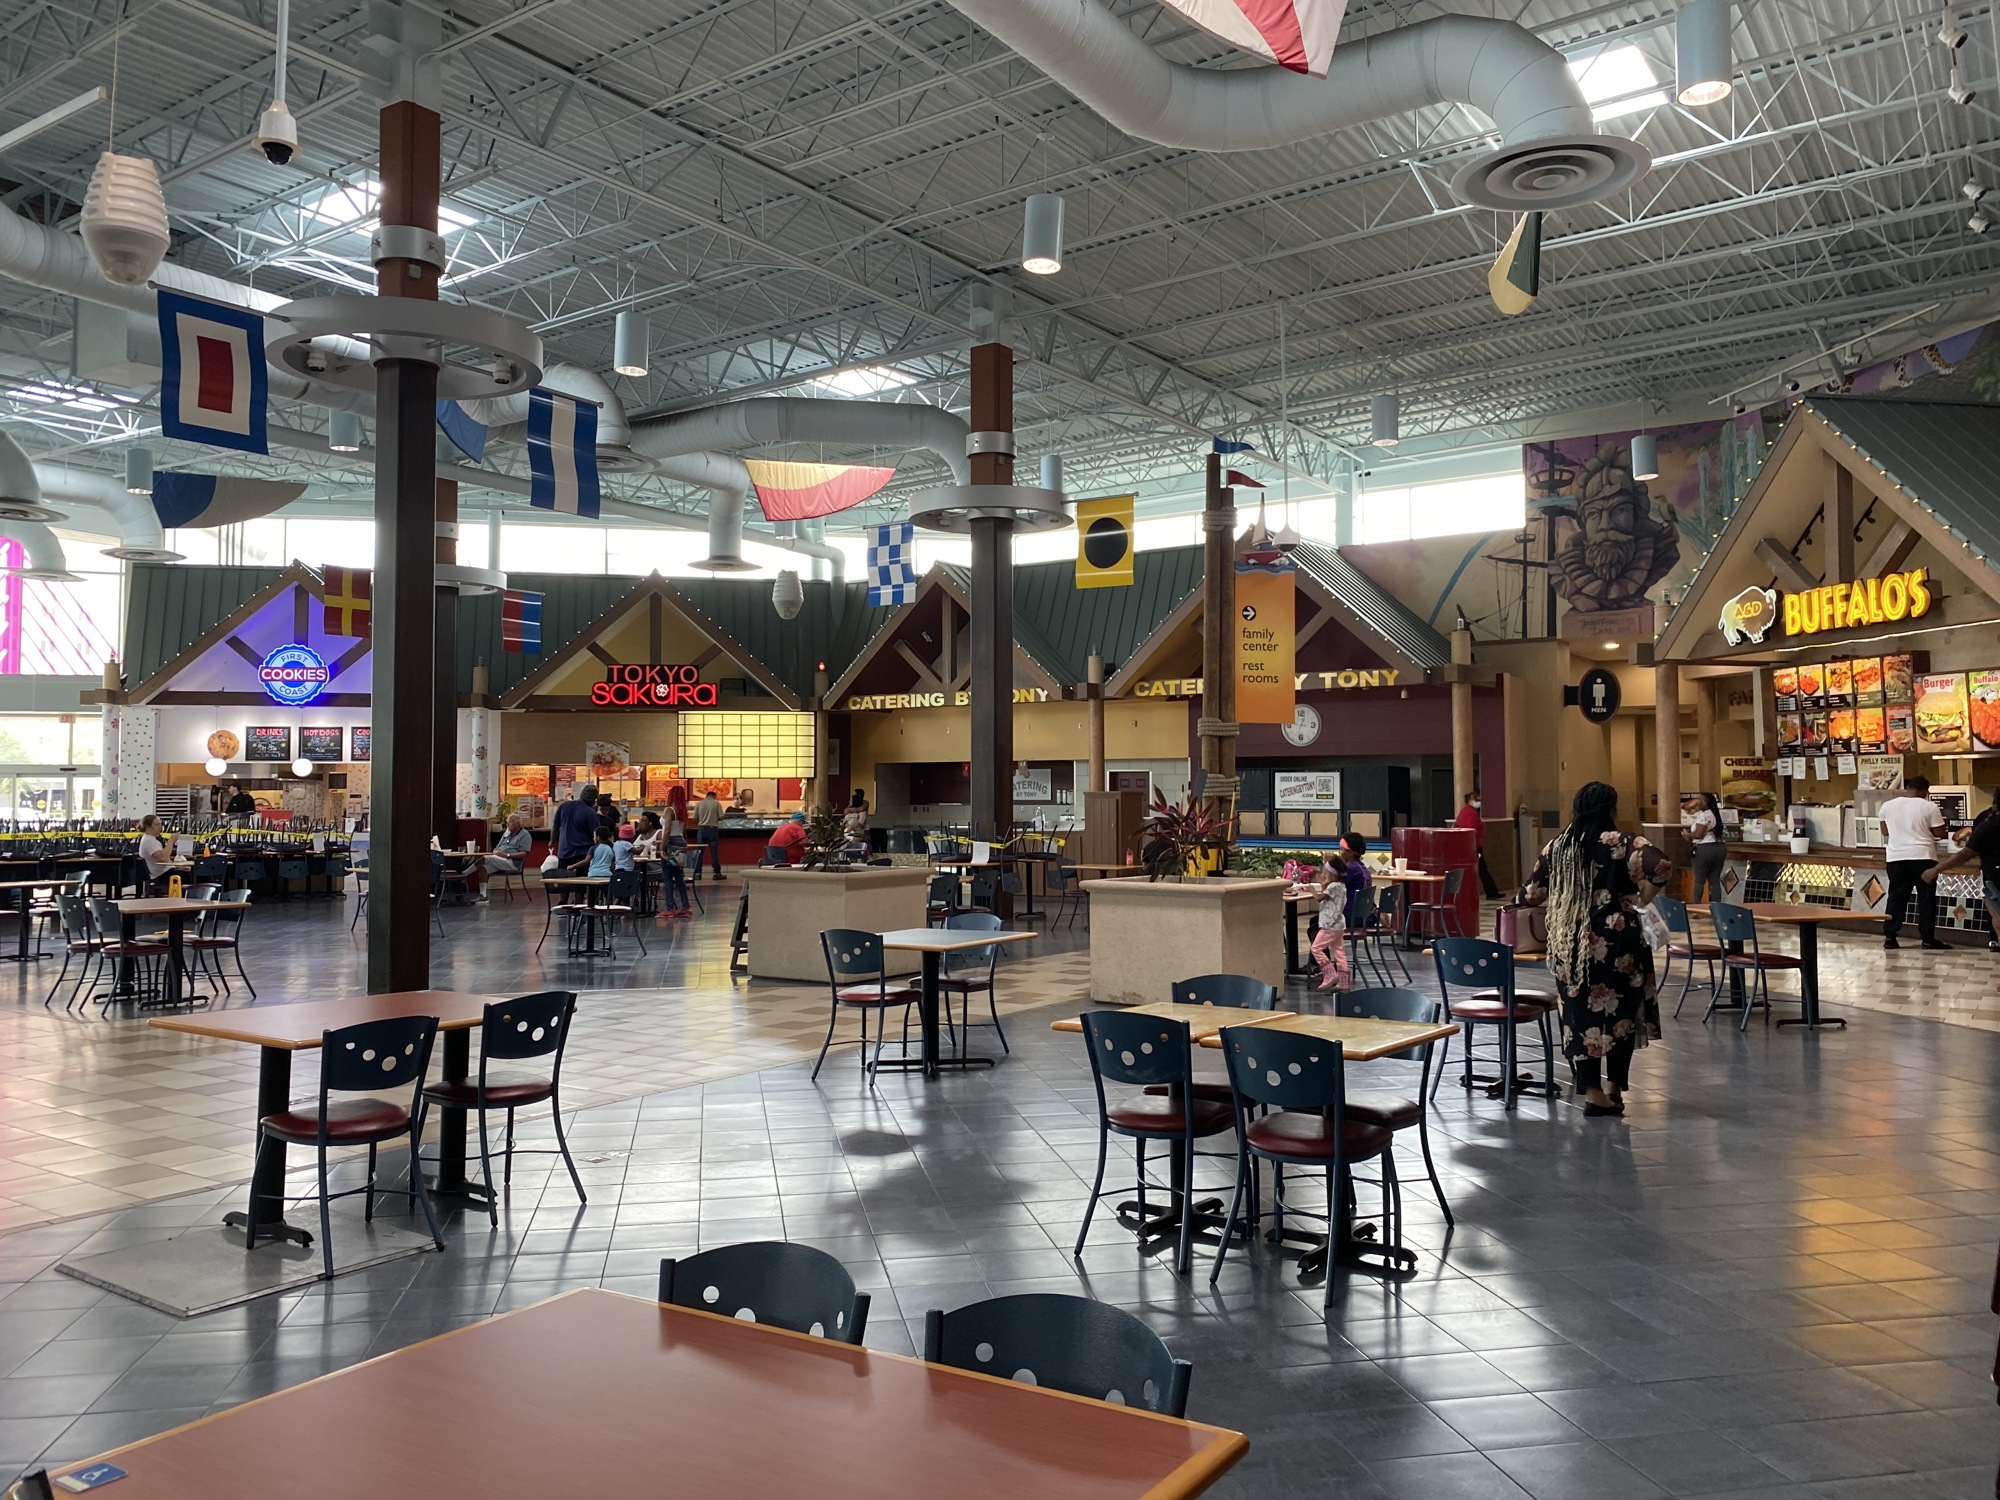 The food court inside Regency Square Mall.